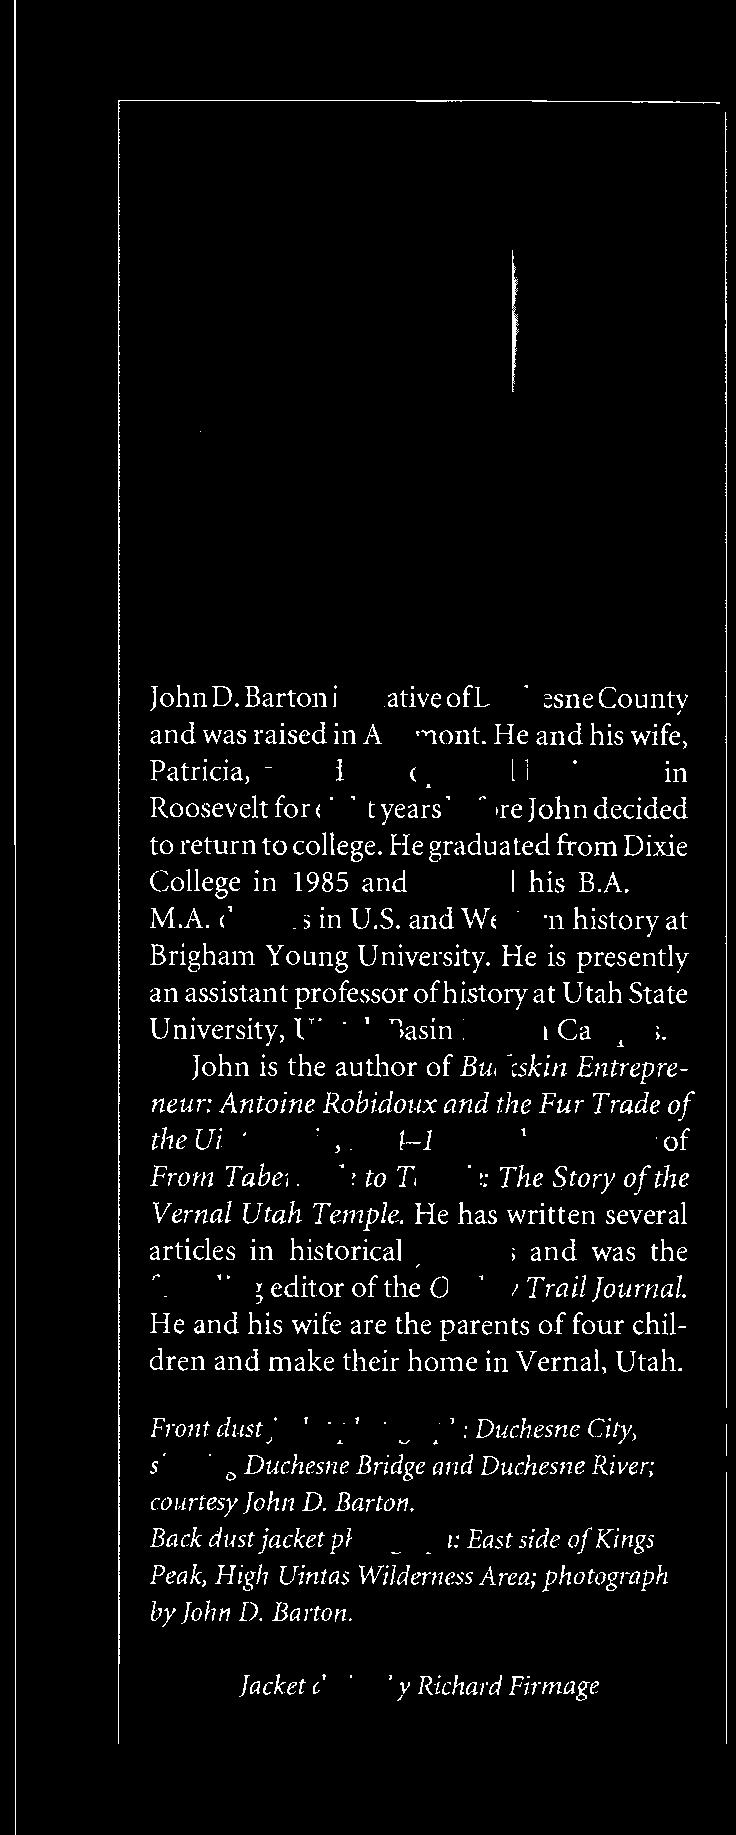 and M.A. degrees in U.S. and Western history at Brigham Young University. He is presently an assistant professor of history at Utah State University, Uintah Basin Branch Campus.